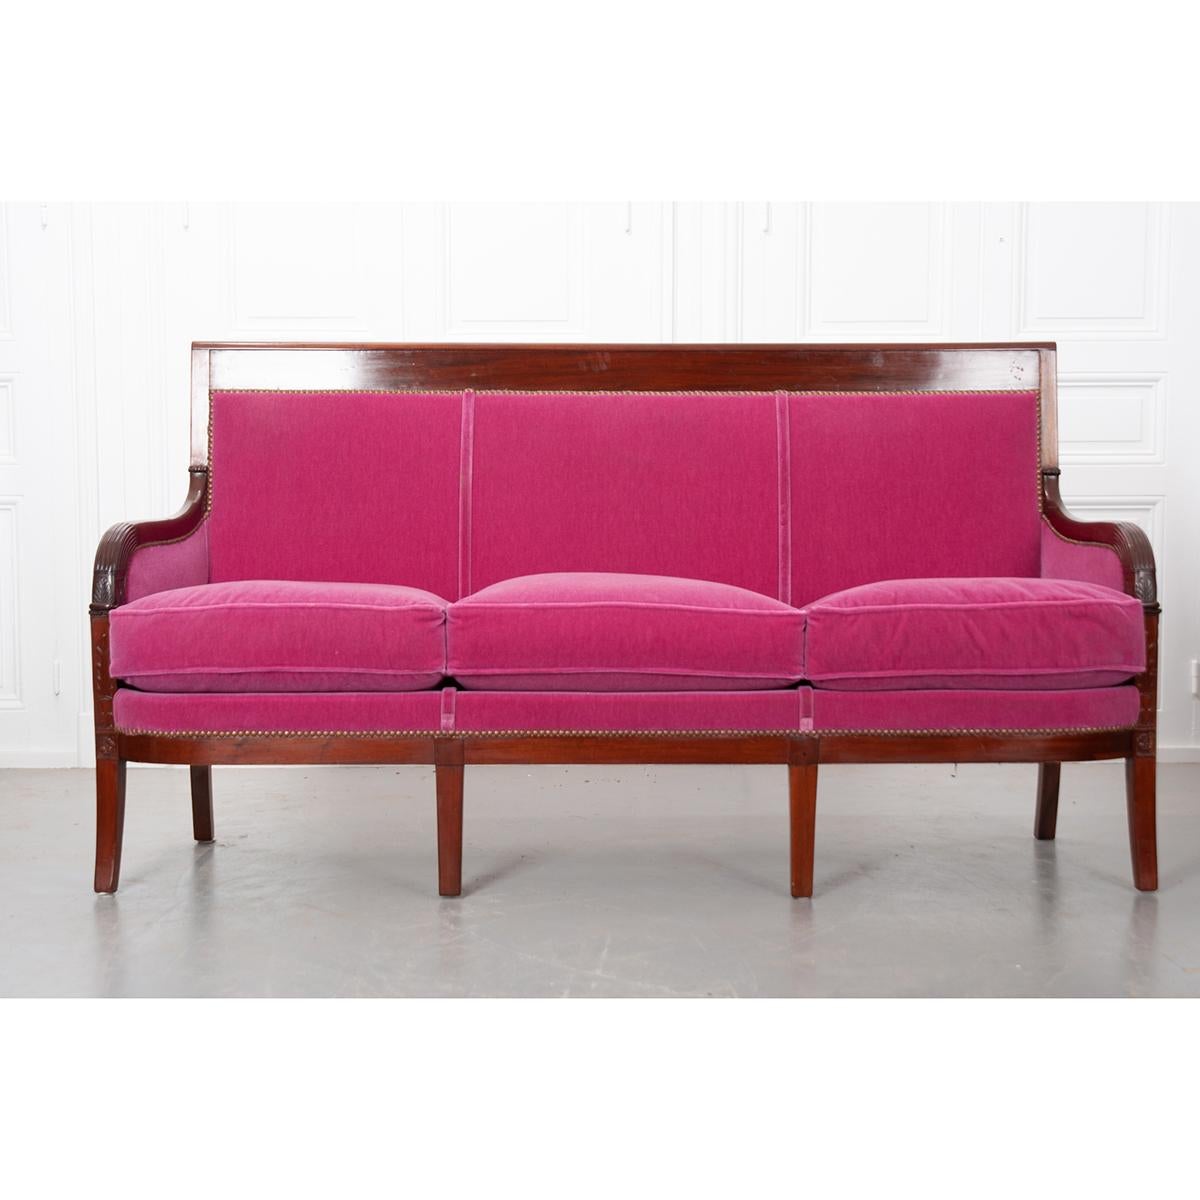 Upholstered in a fabulous pink velvet with nail-head trim, this 19th century Empire-style settee is ready to be added to your space. Its solid mahogany frame has a rich, deep color and features hand carved details on the arms extending onto the two